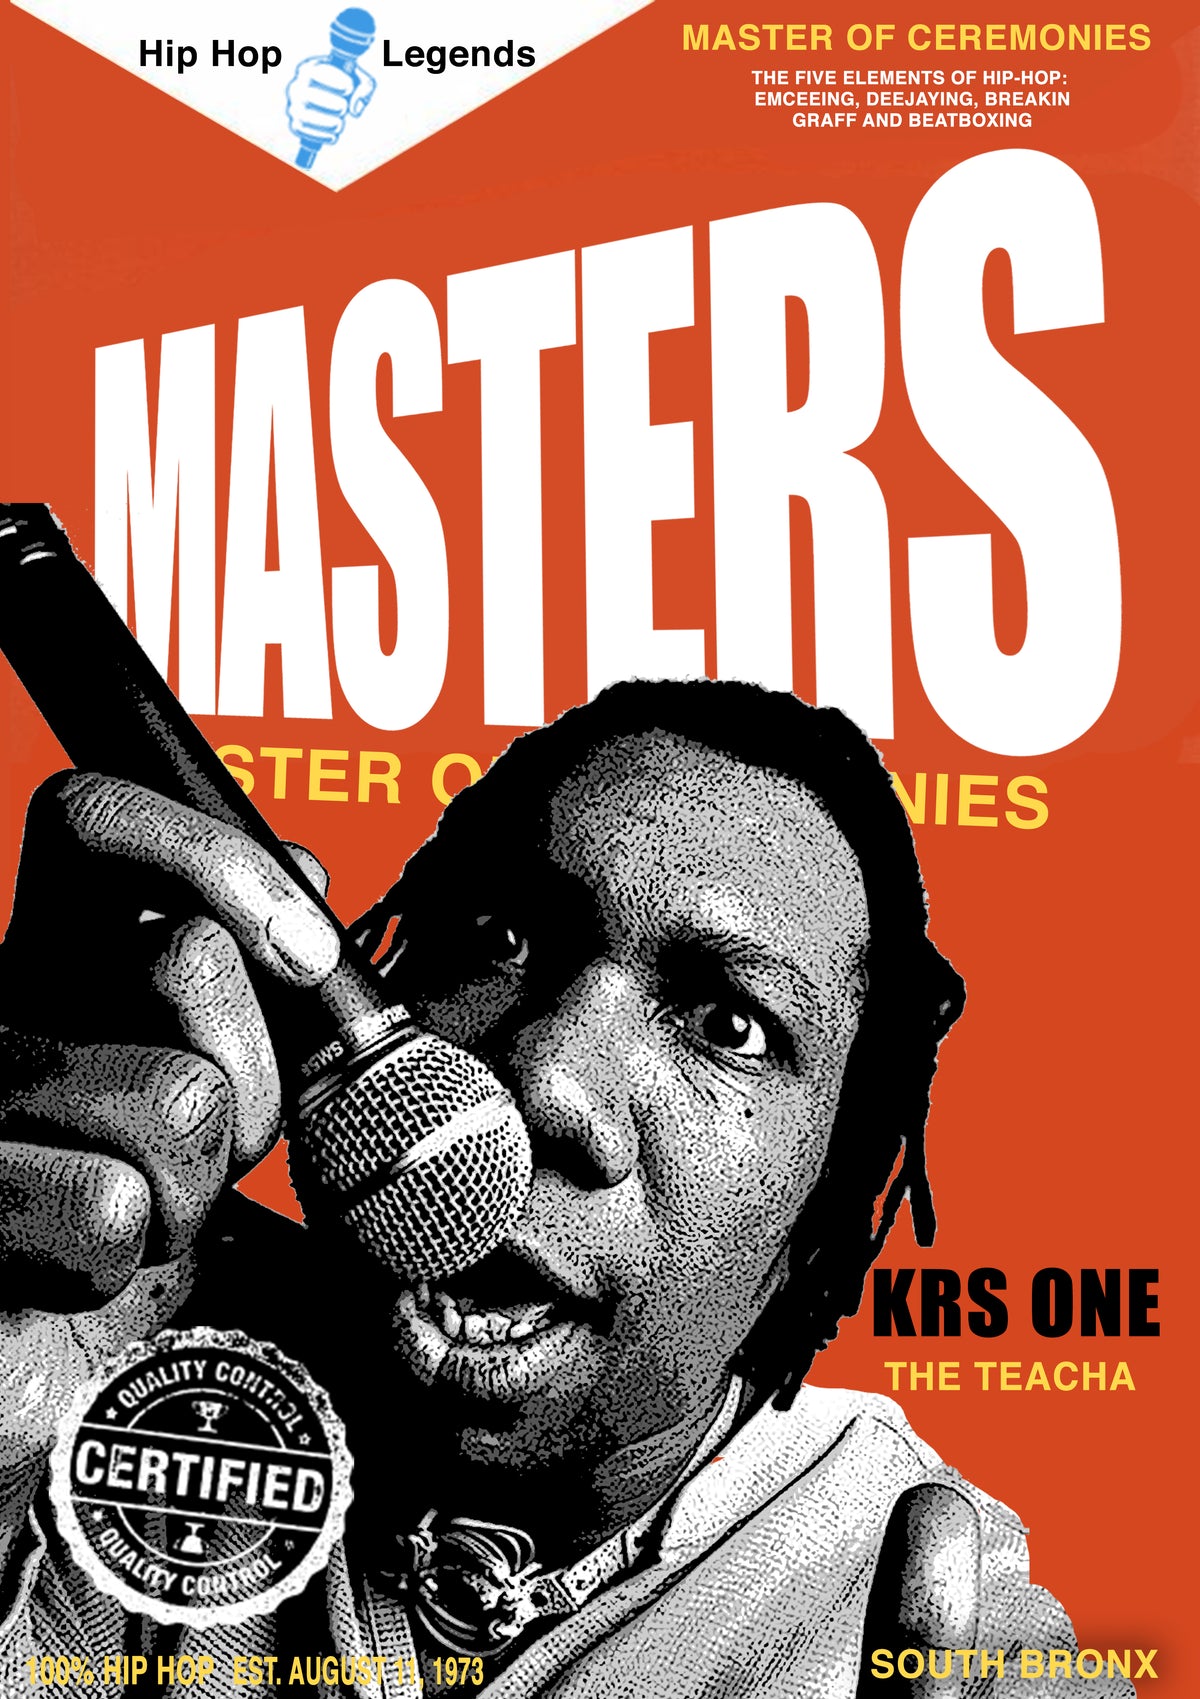 KRS ONE HIP HOP MASTERS